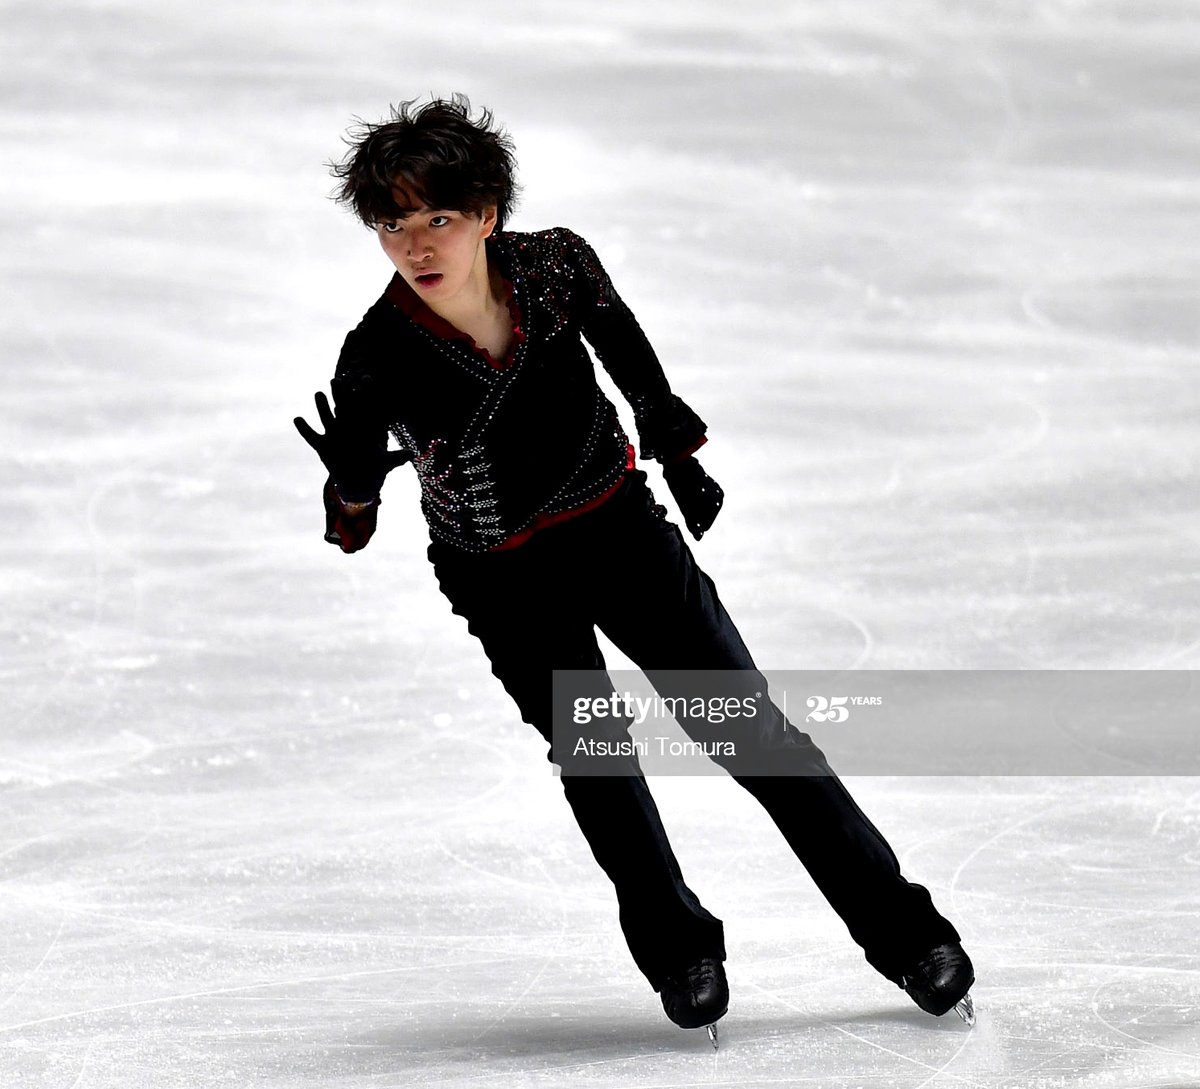 Happy Birthday 🎂 to 🇯🇵 Japan's #YutoKishina! GS Fan Fest @ bit.ly/Yuto_K The 2020 #BavarianOpen 🥉 likes to collect sneakers👟👟👟! 📷 2019-20 FS #ElliotGoldenthal #FigureSkating - Good luck at 2020 #NHKTrophy!